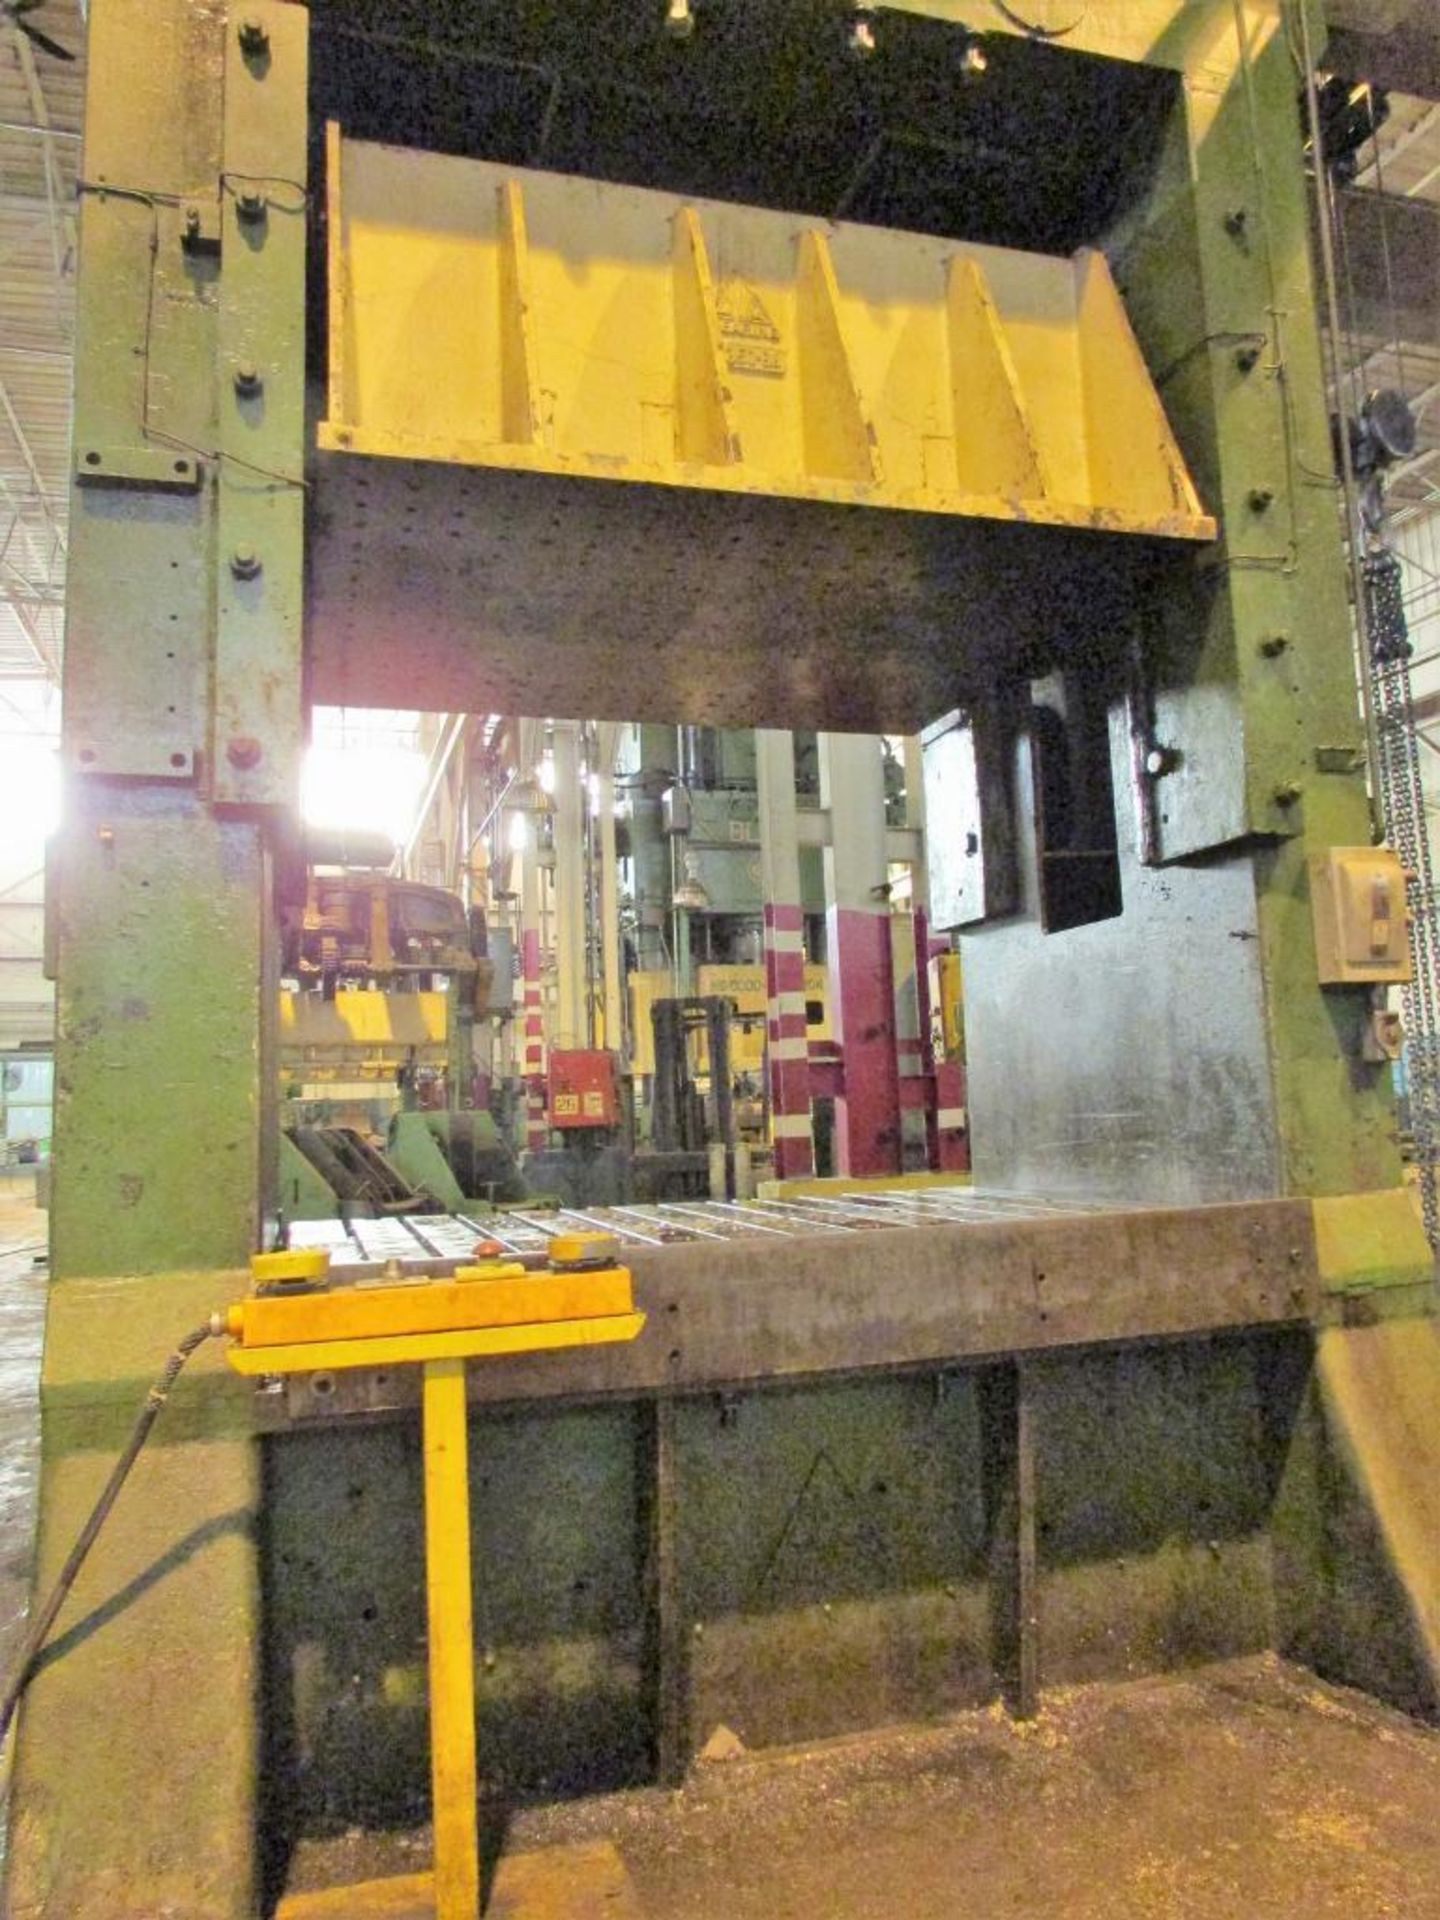 Clearing F2-350-84 350 Ton Two Point Eccentric Straight Side Press - Image 9 of 17